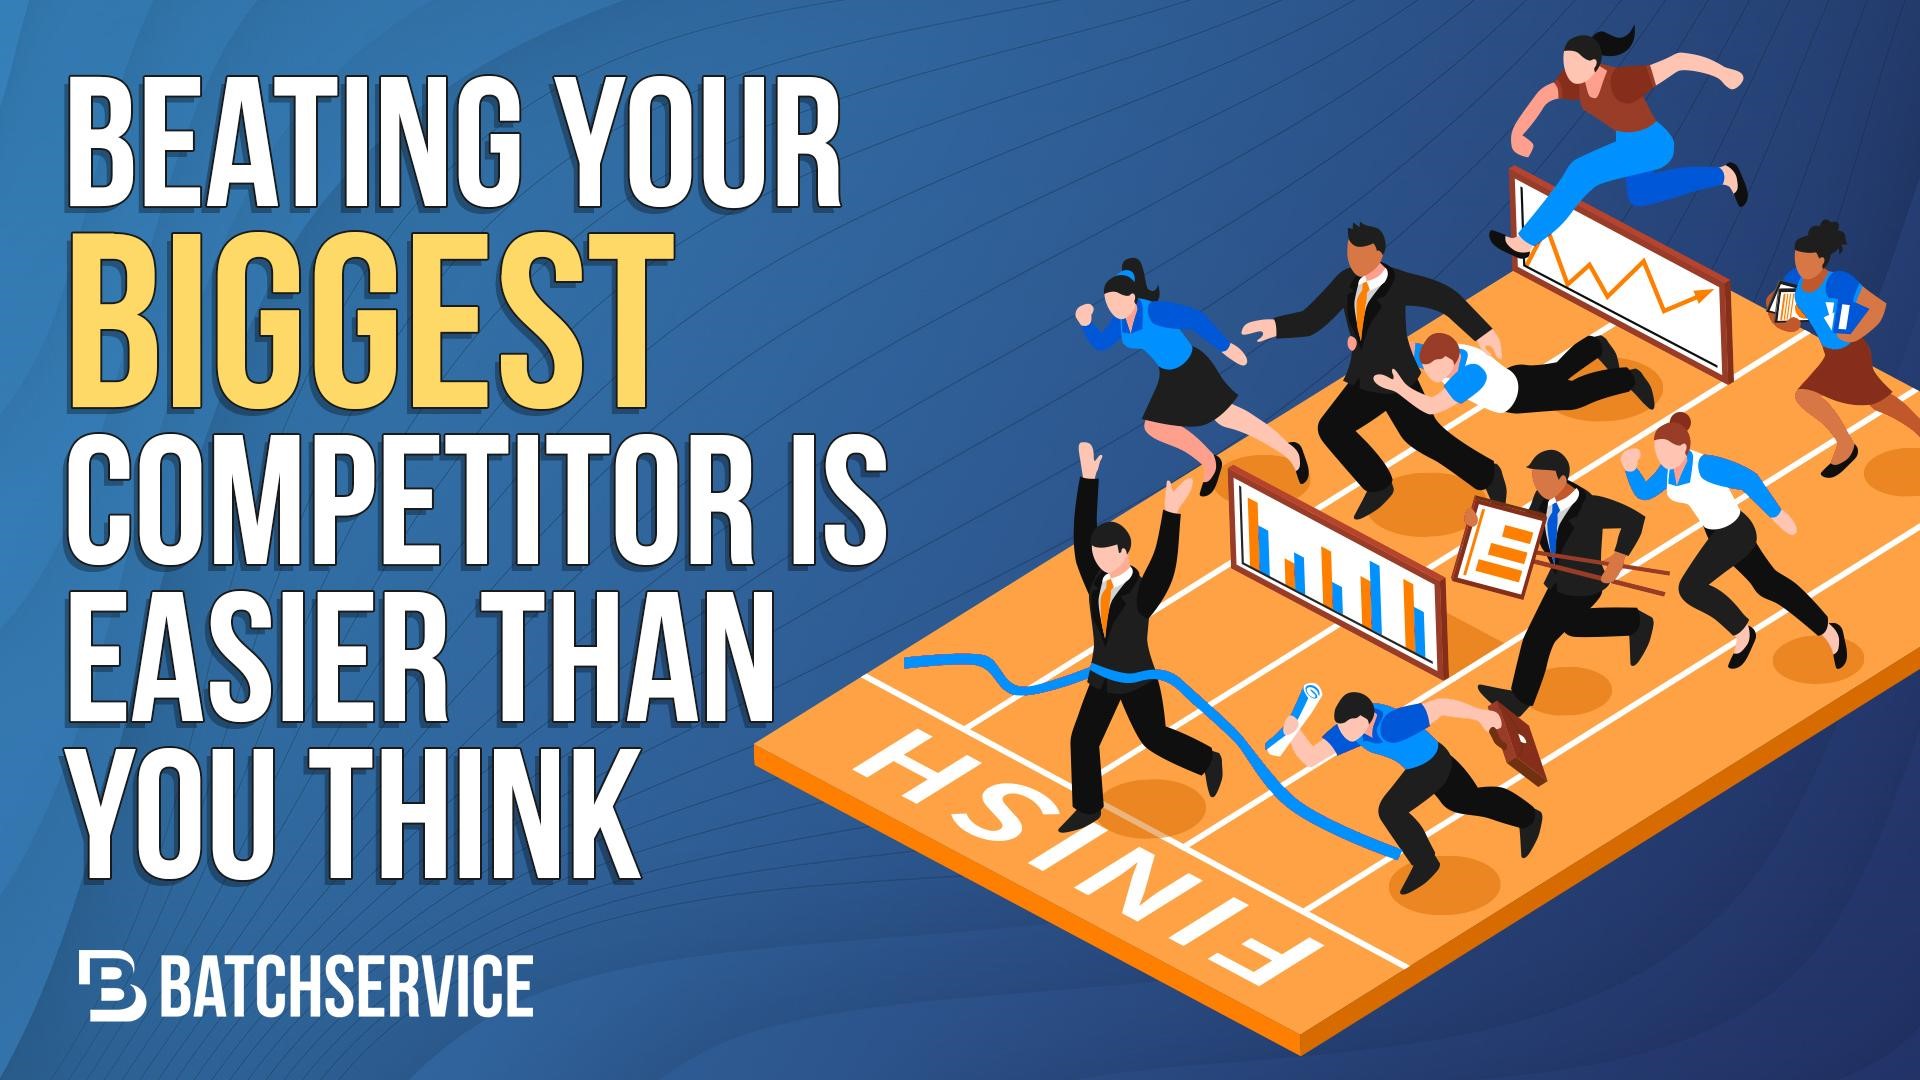 Beating Your Biggest Competitor Is Easier than You Think!